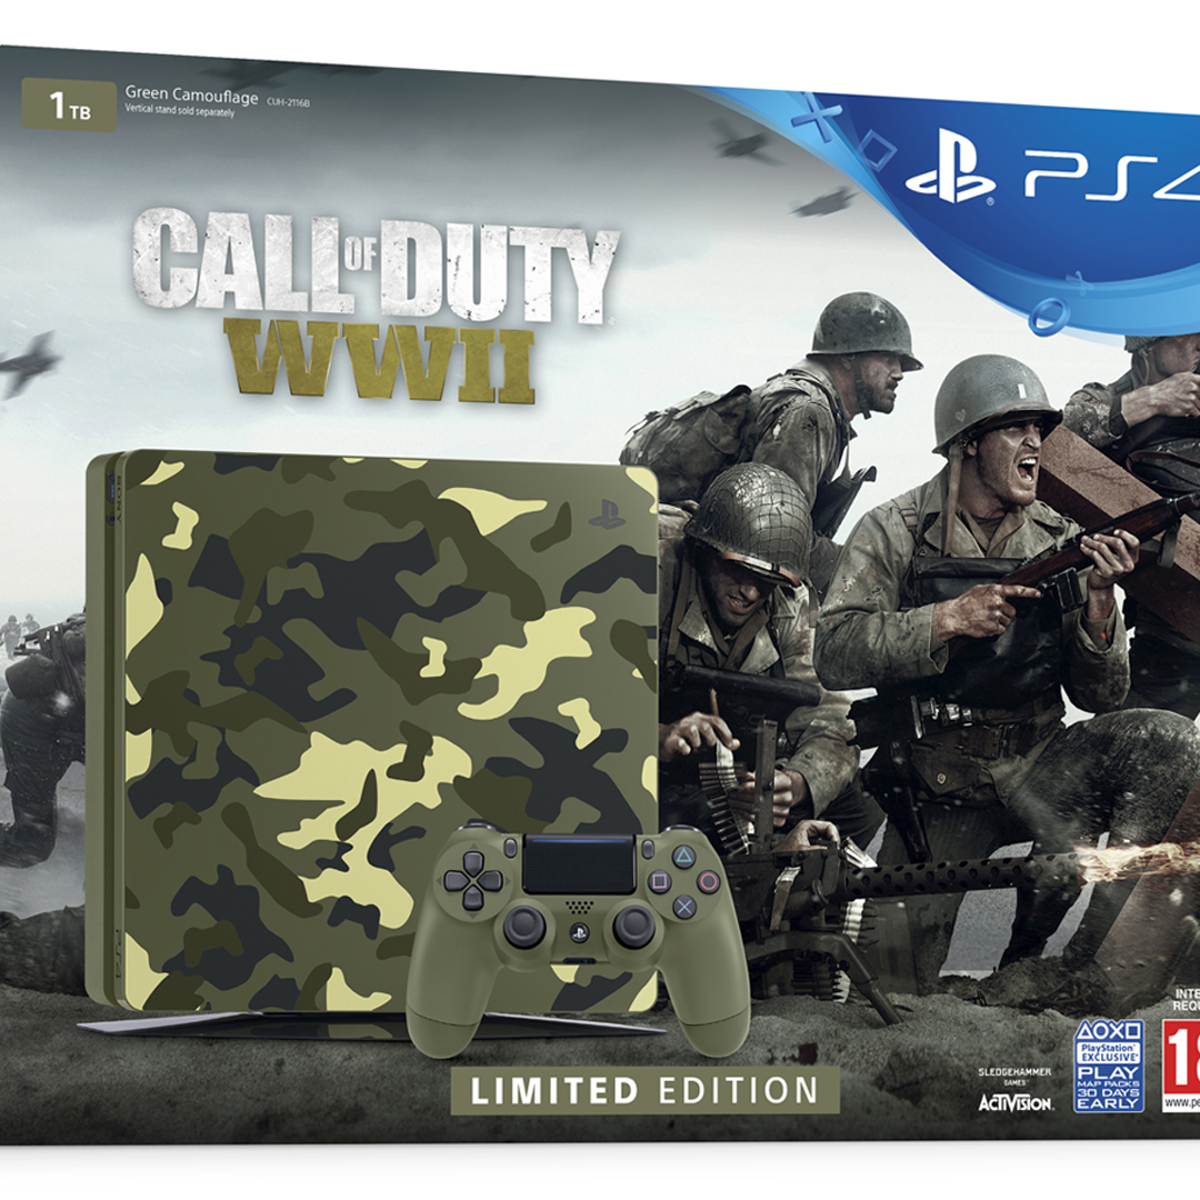 Limited Edition Call of Duty WW2 PS4 console available to pre